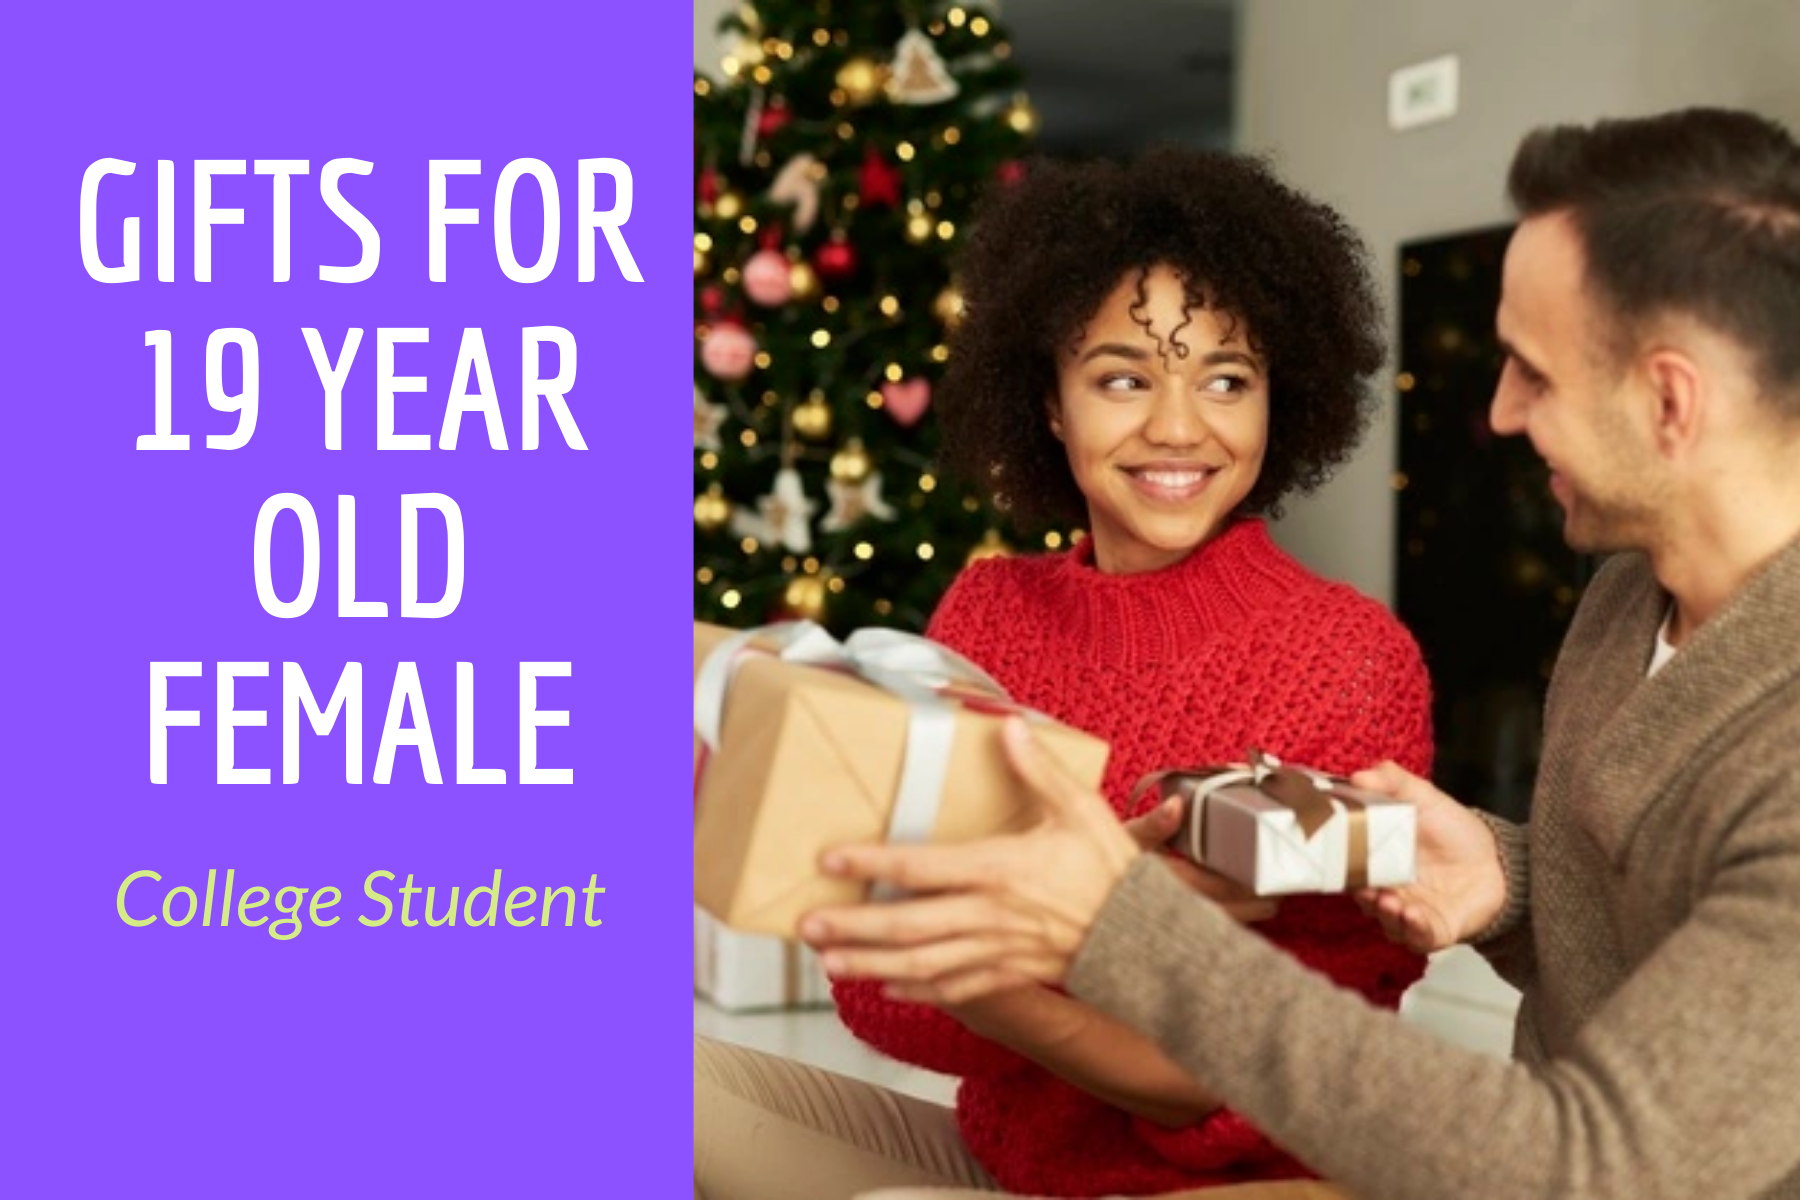 Gifts for 19 Year Old Female College Student